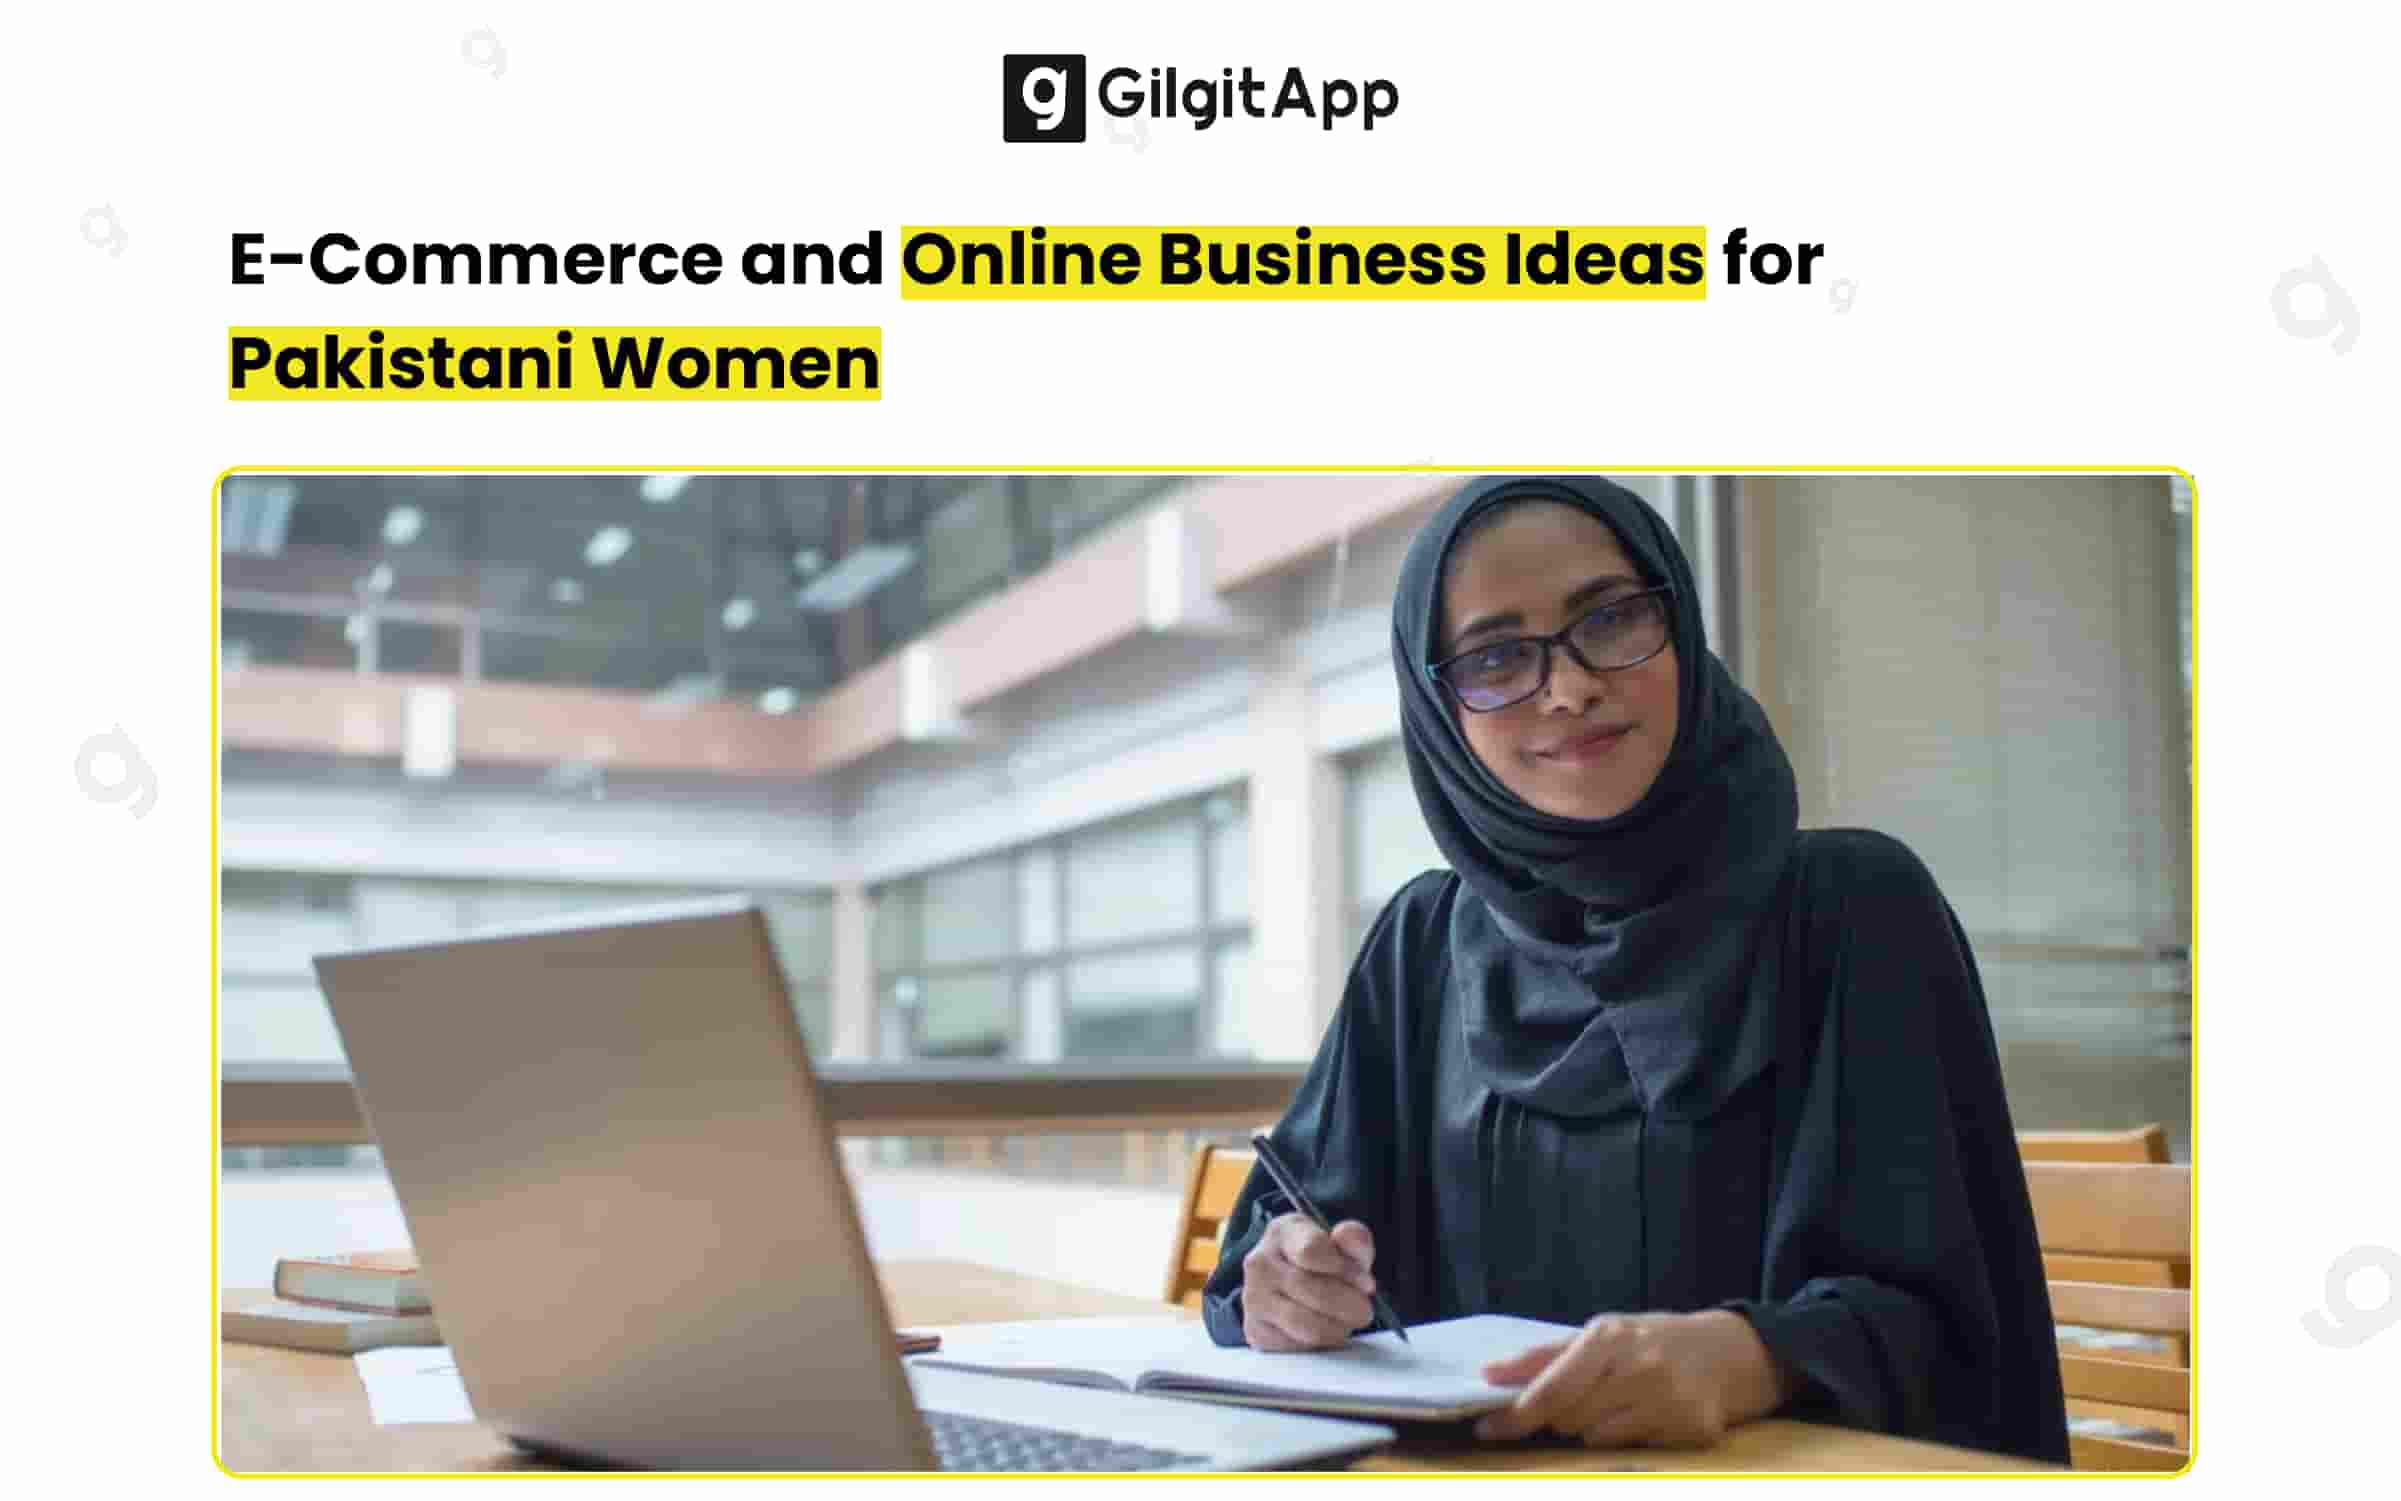 E-Commerce and Online Business Ideas for Pakistani Women